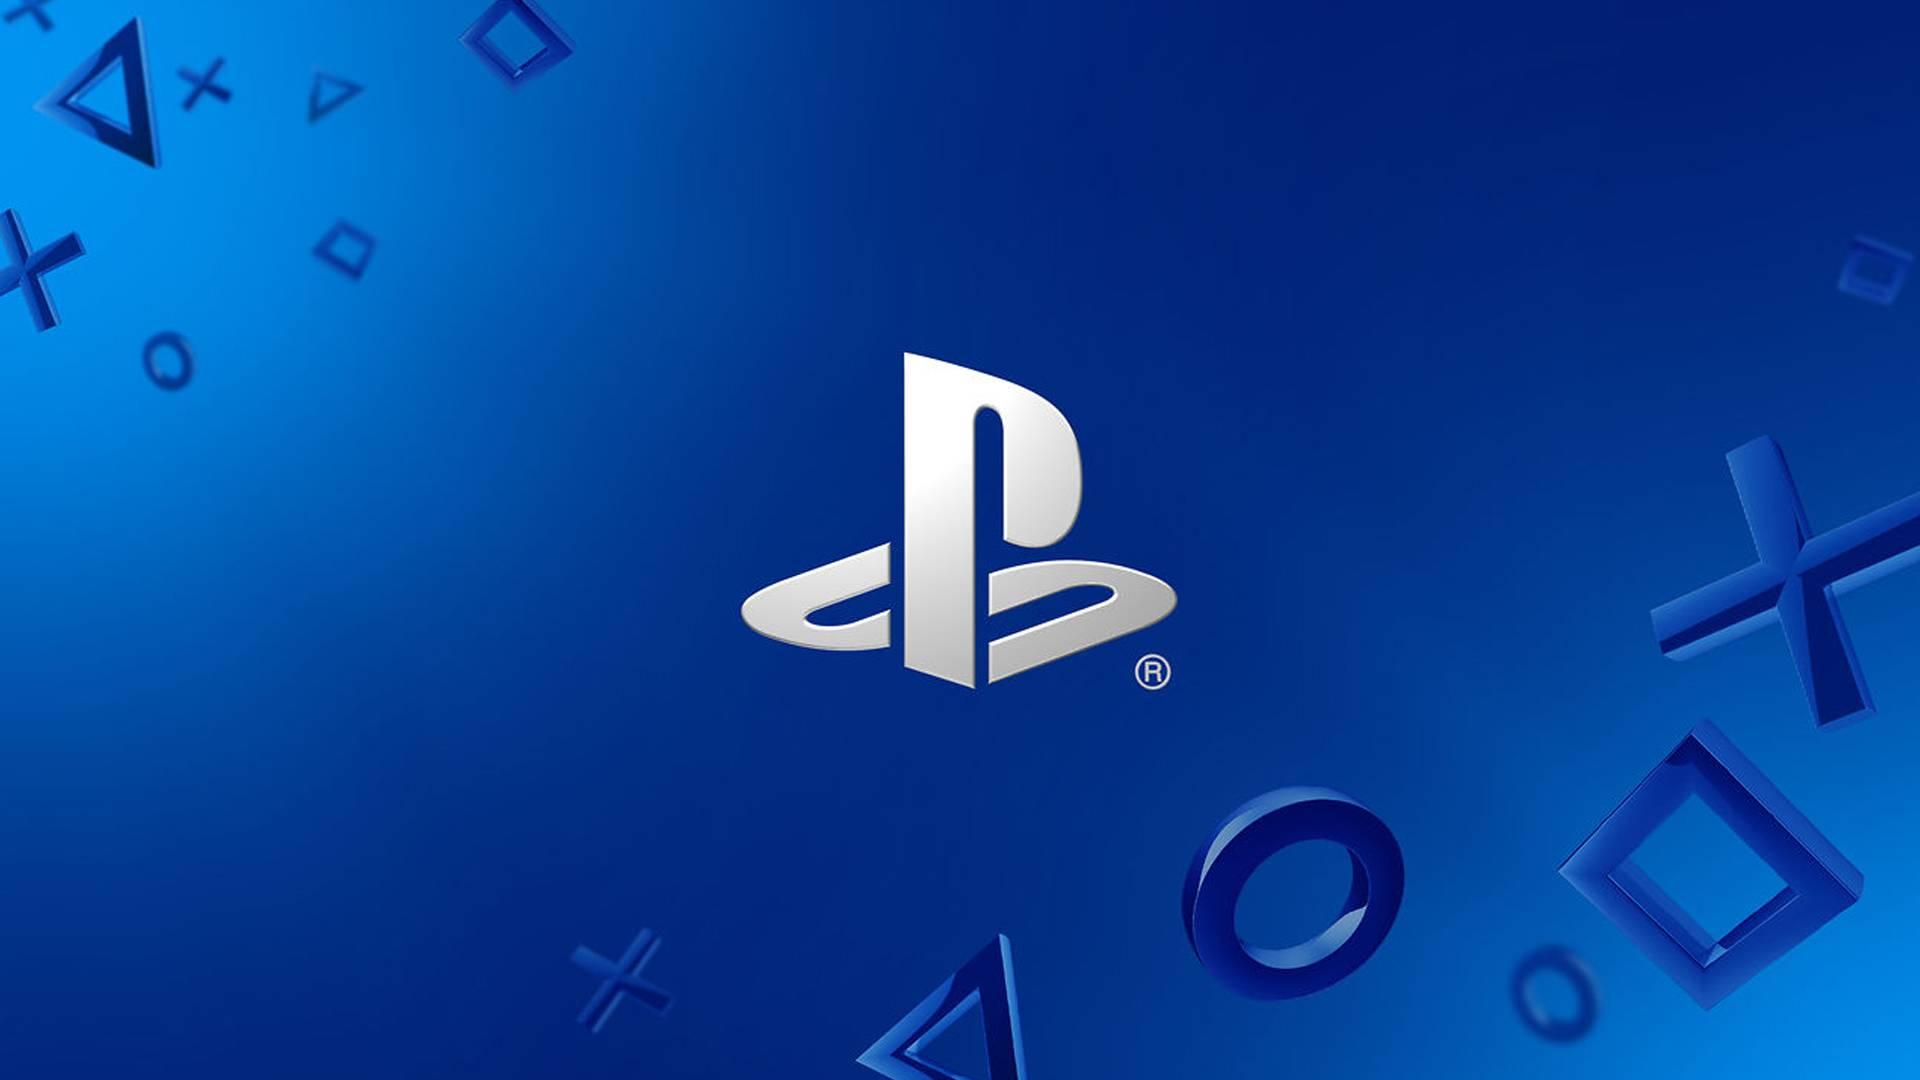 PlayStation State of Play showcase set for 13 September